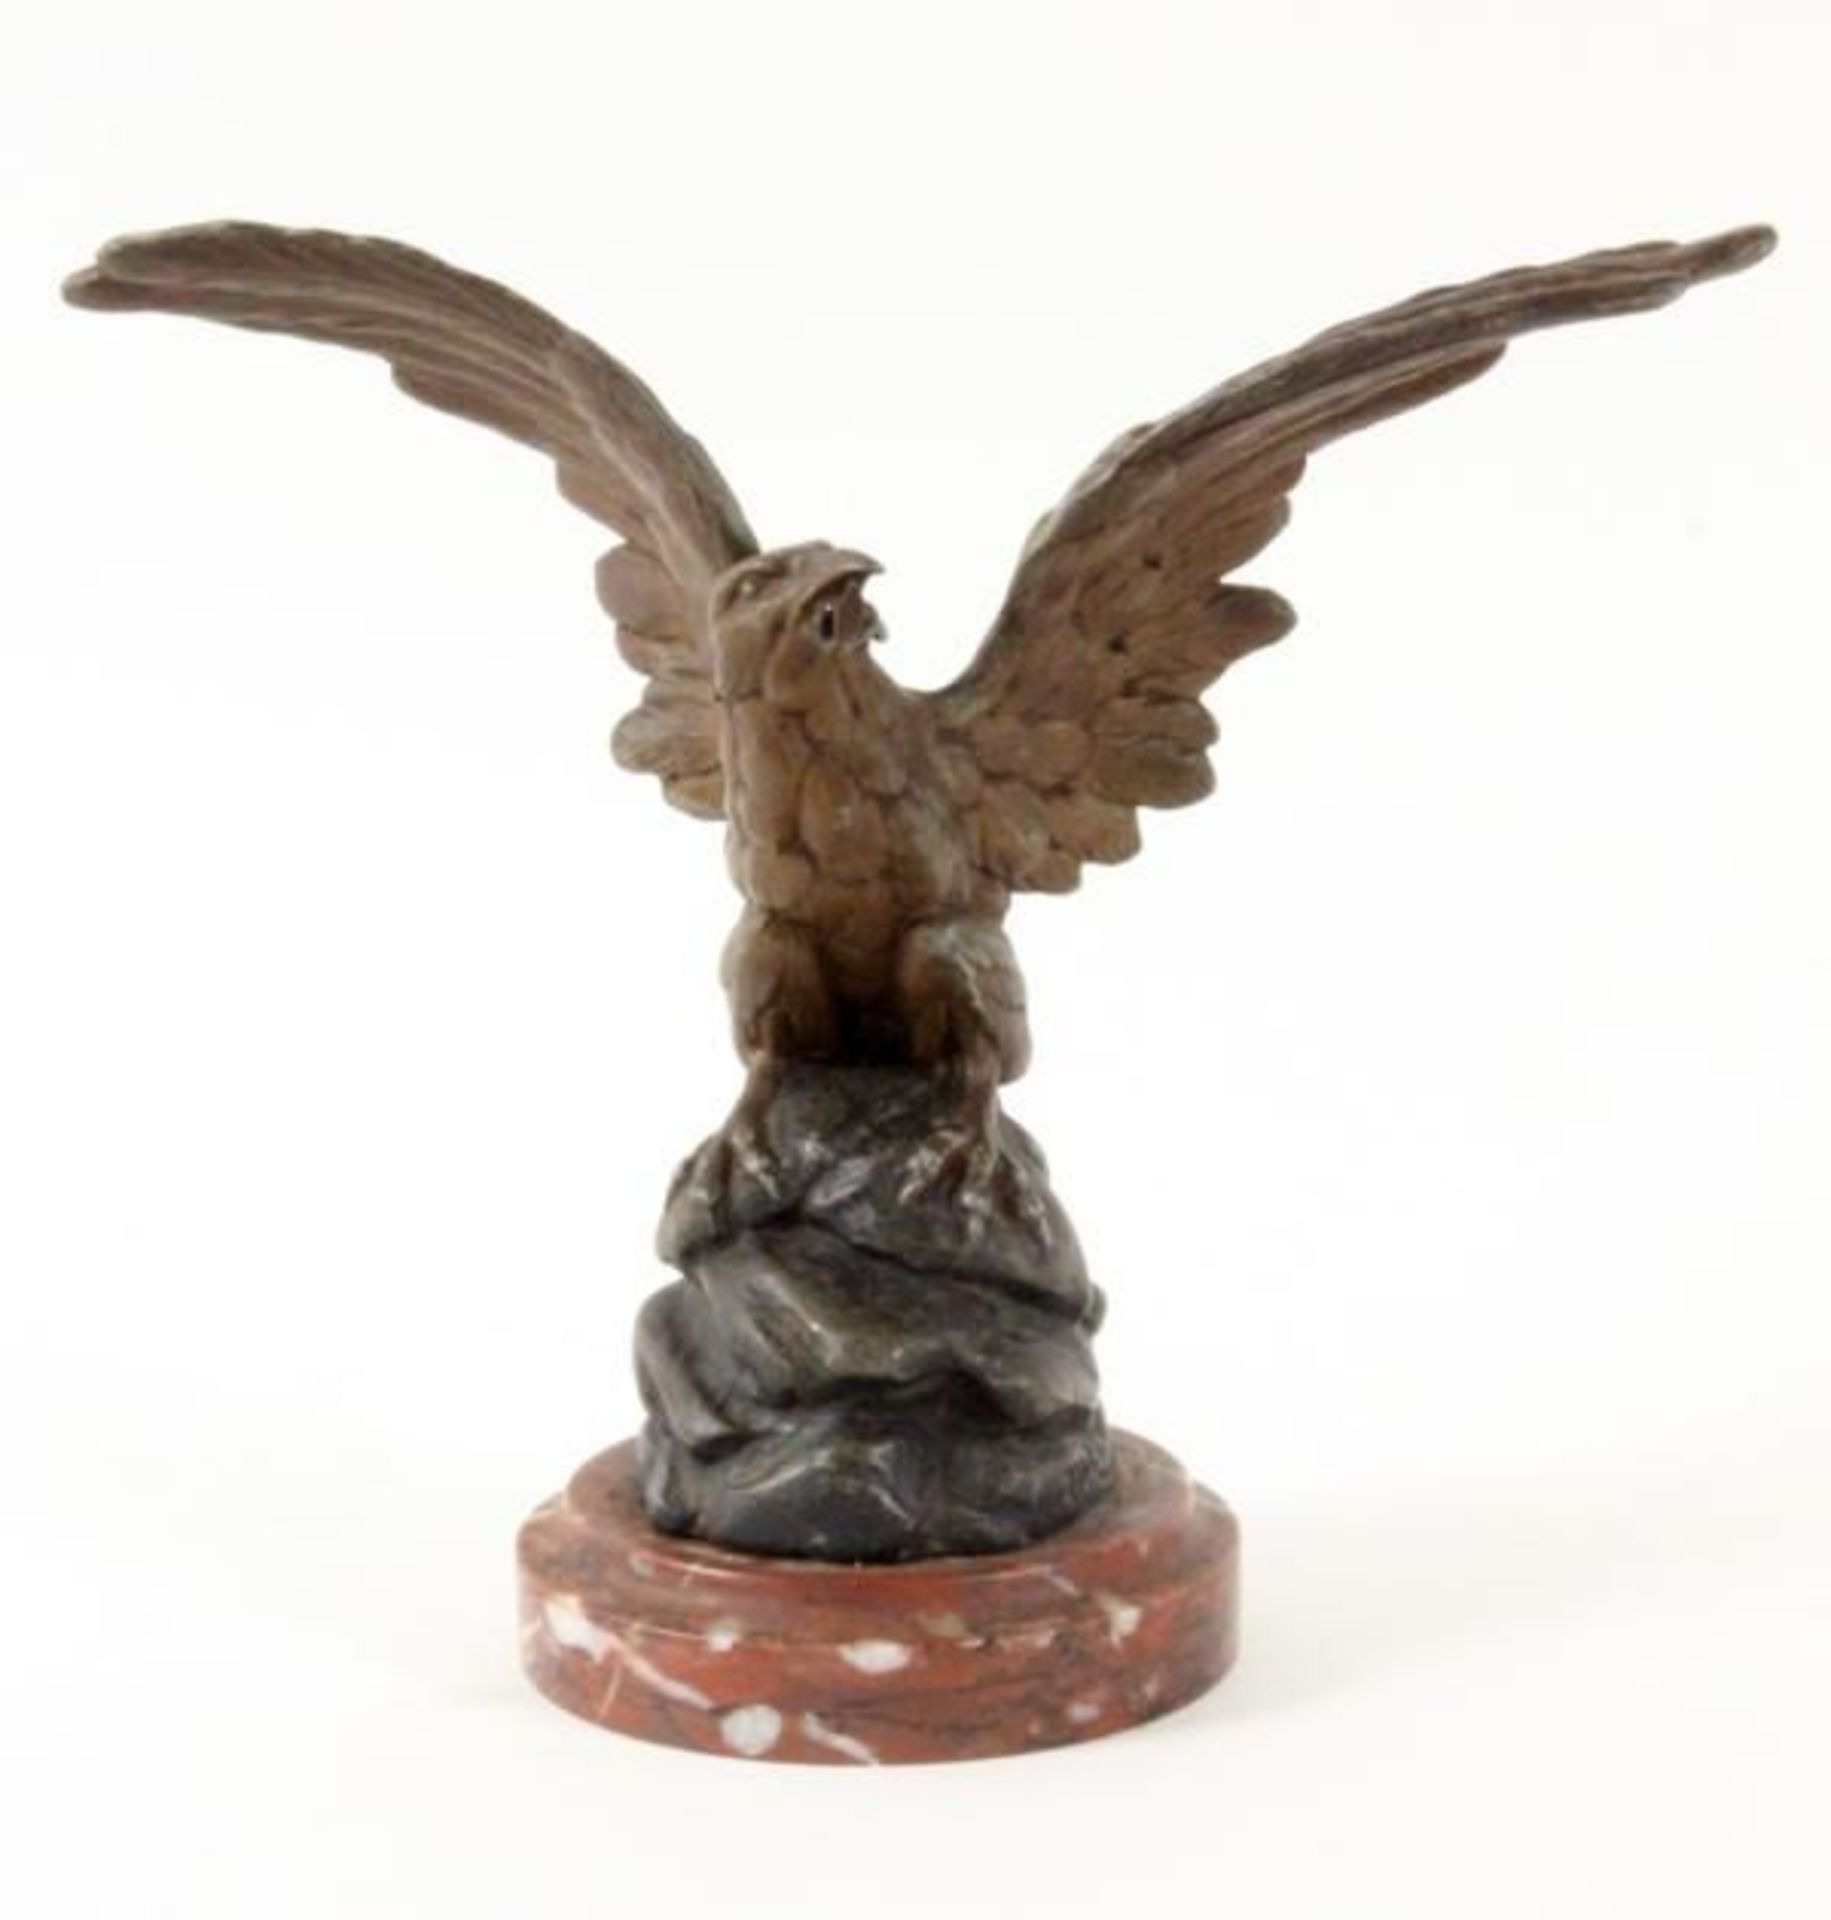 A POCKET WATCH STAND formed as an eagle c.1900 Patinated cast metal on marble base. Height 17,5cm